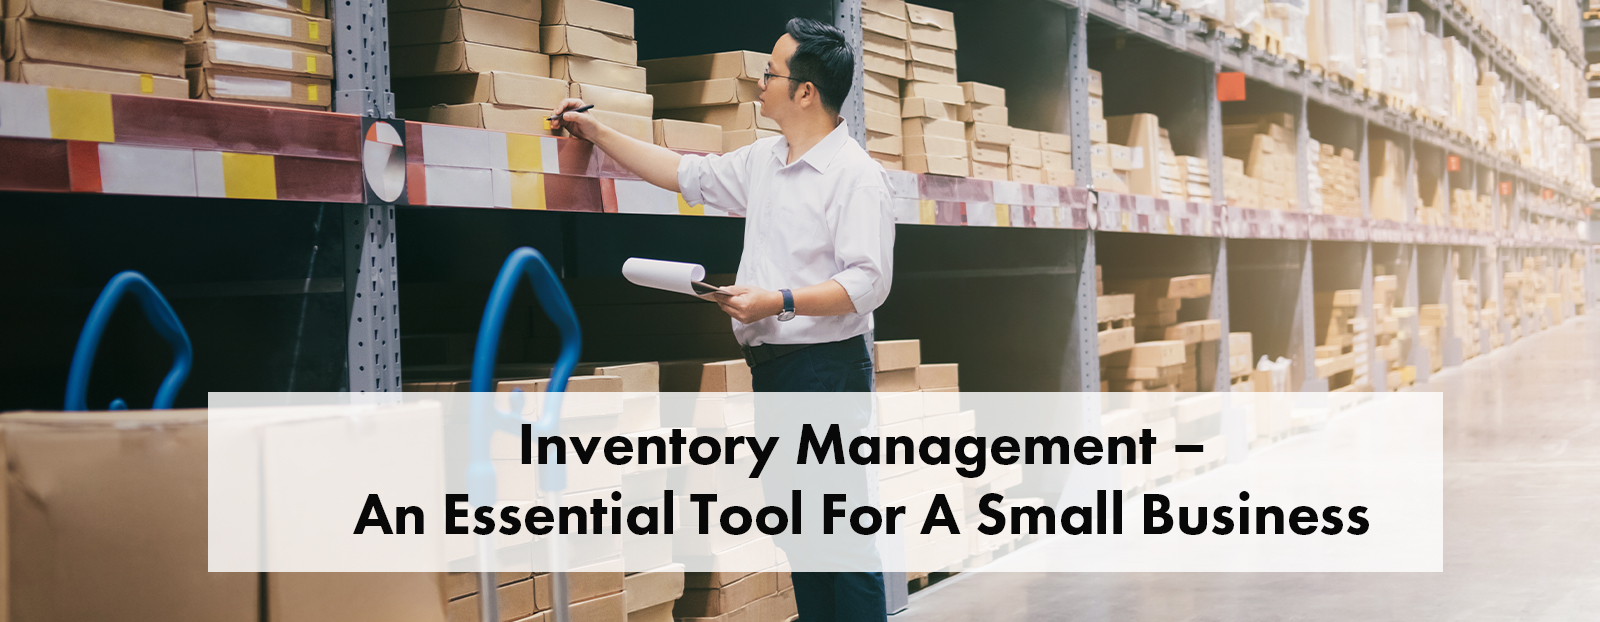 Inventory Management – An Essential Tool For A Small Business